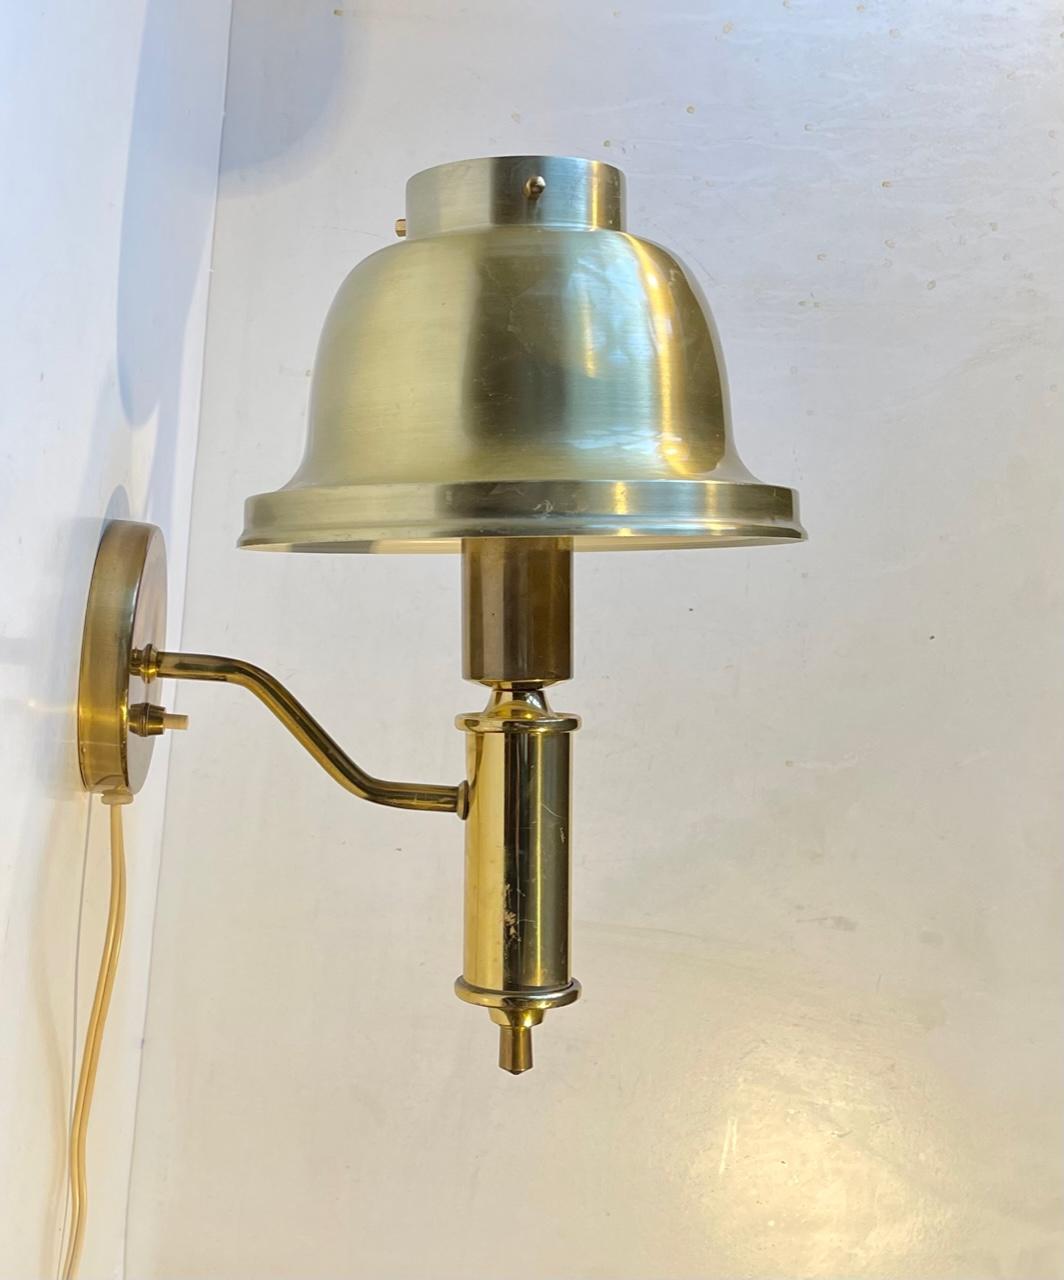 Fixed Wall light in brass and brass alloy aluminium. Nautical modern styling. It was made by Laoni in Denmark during the 1970s. Measurements: H: 32 cm, Diameter: 20 cm, Dept/reach: 28 cm.
For the US. It will come installed with a 110 watt adaptor